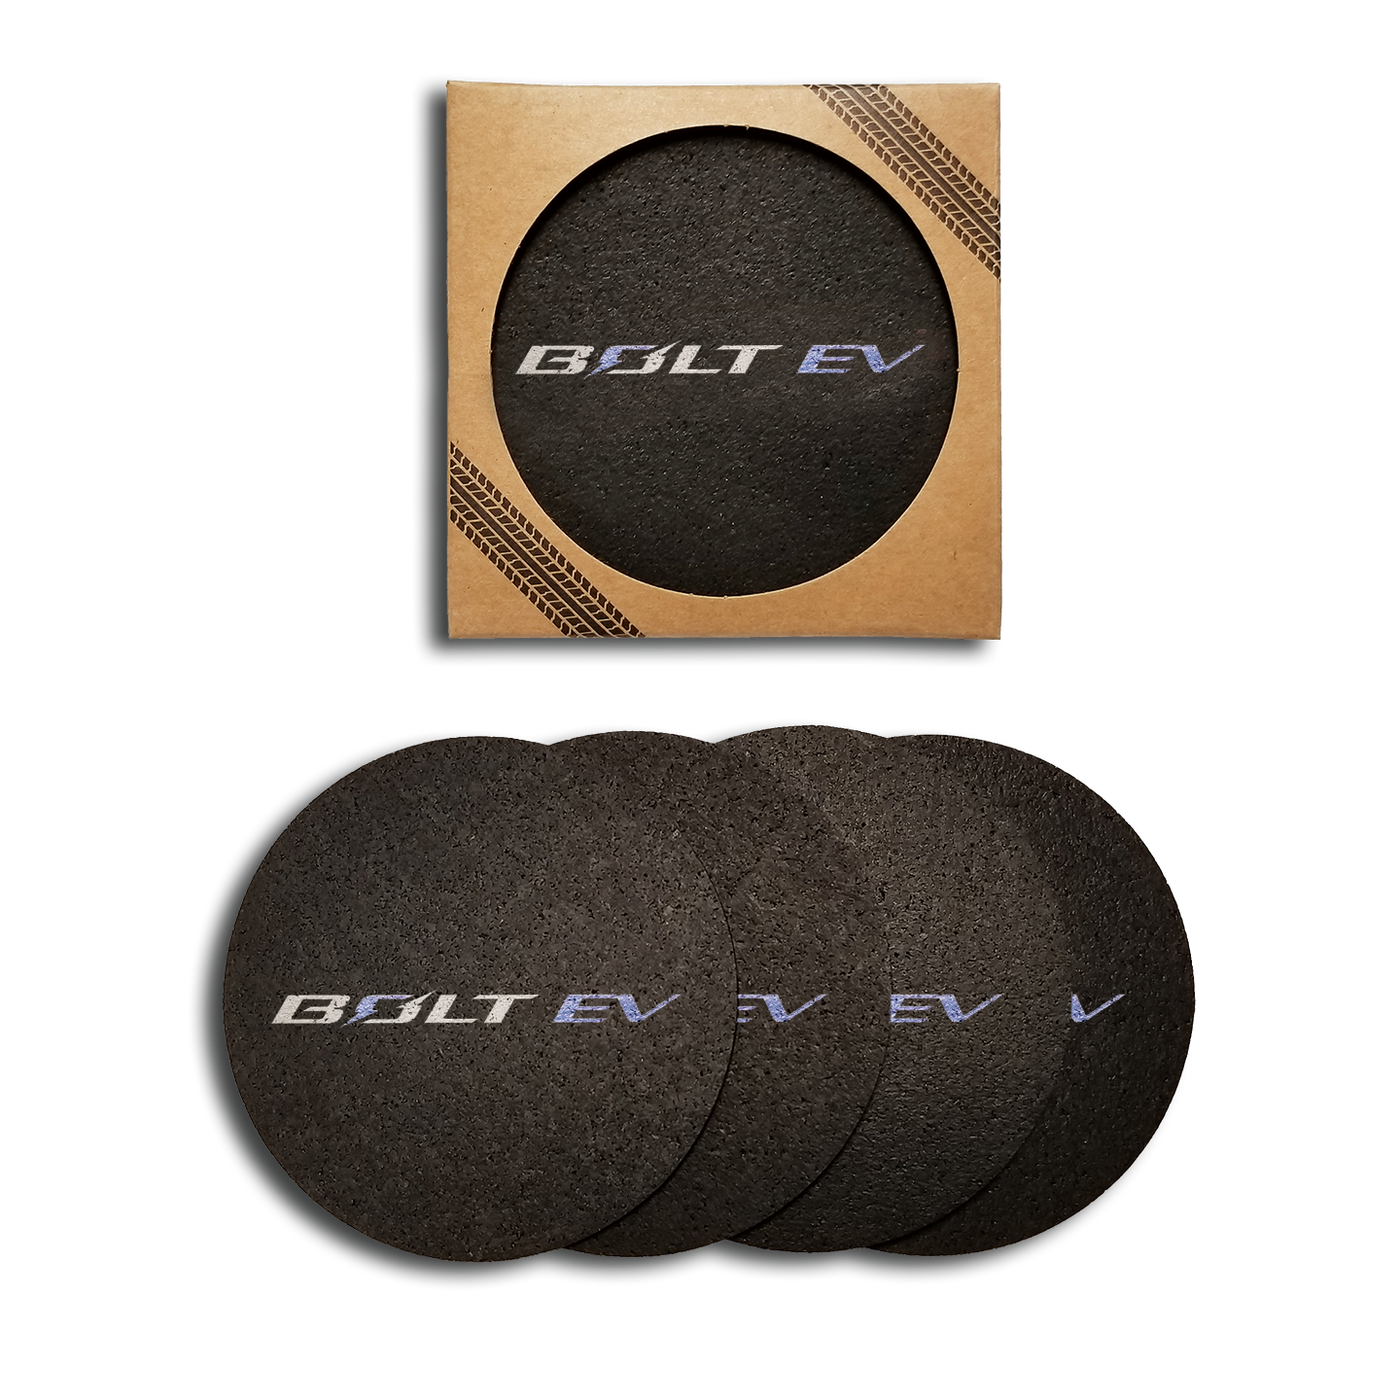 Chevy Bolt EV Recycled Rubber Tire (4 Pack) Coaster Set *Made In The USA